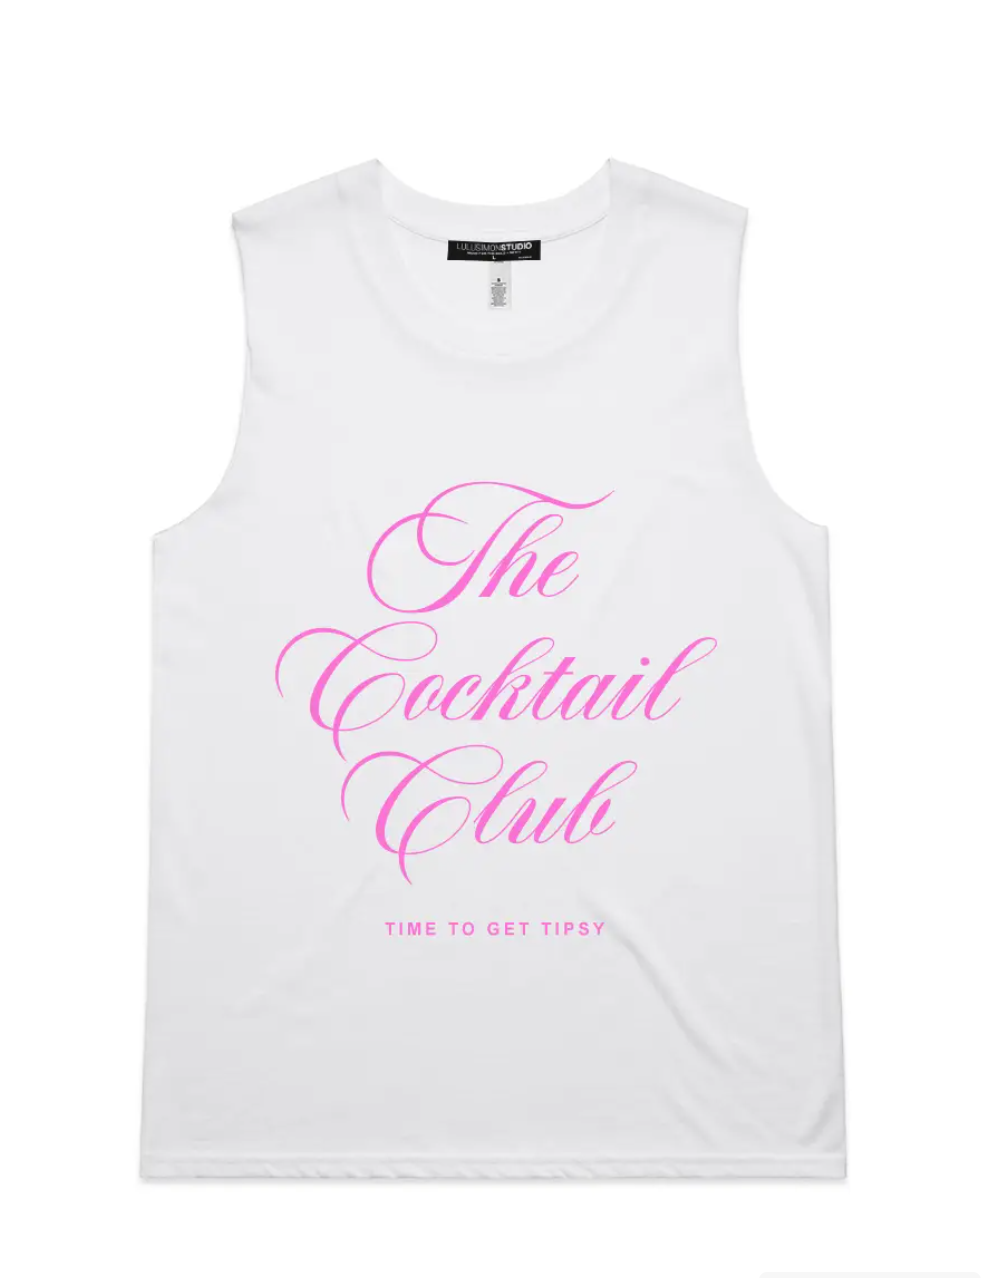 The Cocktail Club Muscle Tank